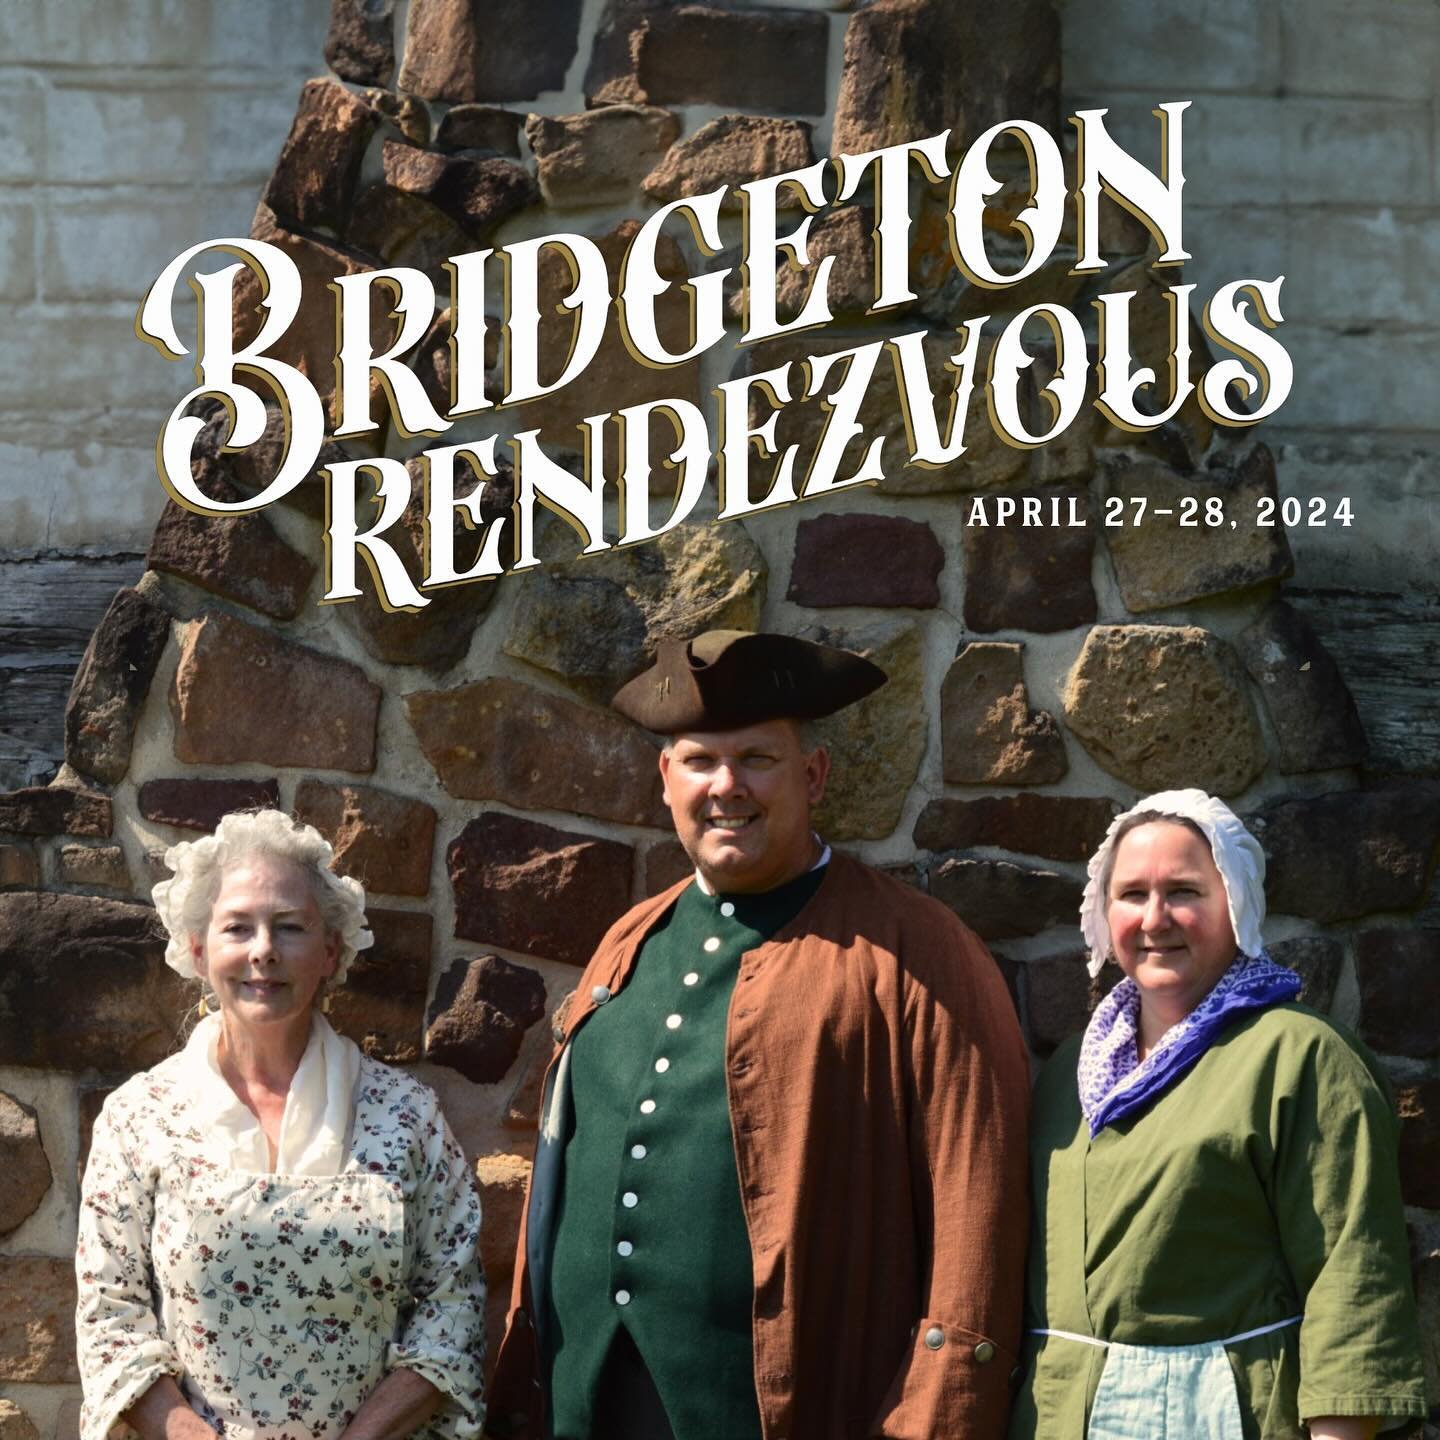 Step back in history THIS weekend at the Bridgeton Rendezvous and experience authentic 1750s-1840s in a beautiful setting. 🌿

Living history reenactment, trading posts, black powder shoots, tomahawk/knife throwing, a skillet throw, and be sure to ch